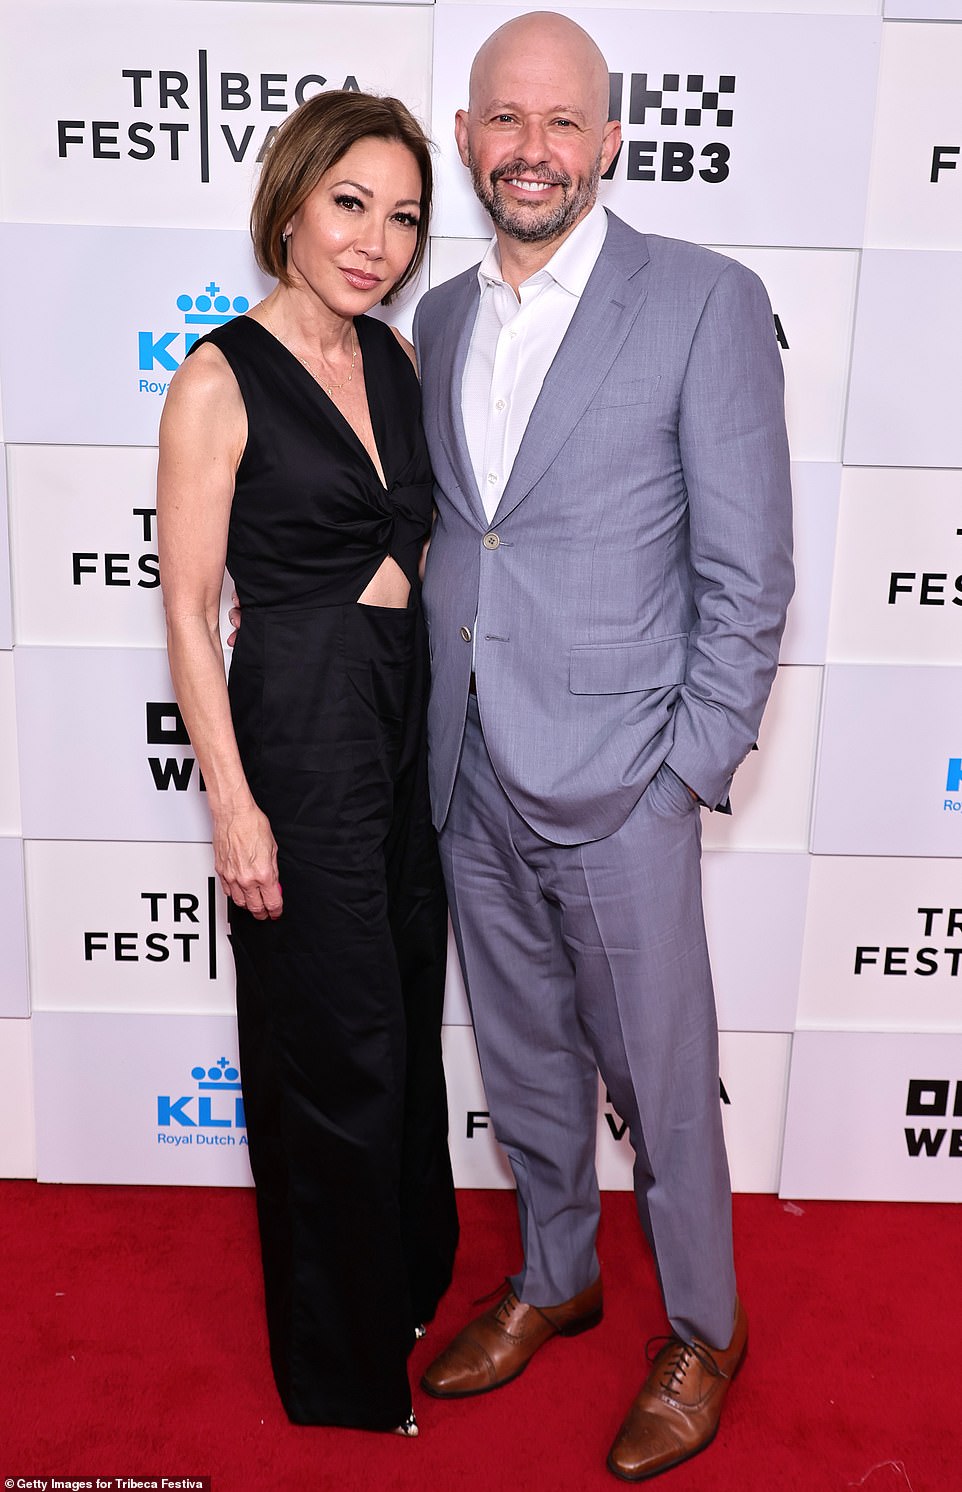 John looked like a dapper guy at the premiere wearing a silver suit without a tie, he posed with his wife Lisa Joyner who was dressed in black